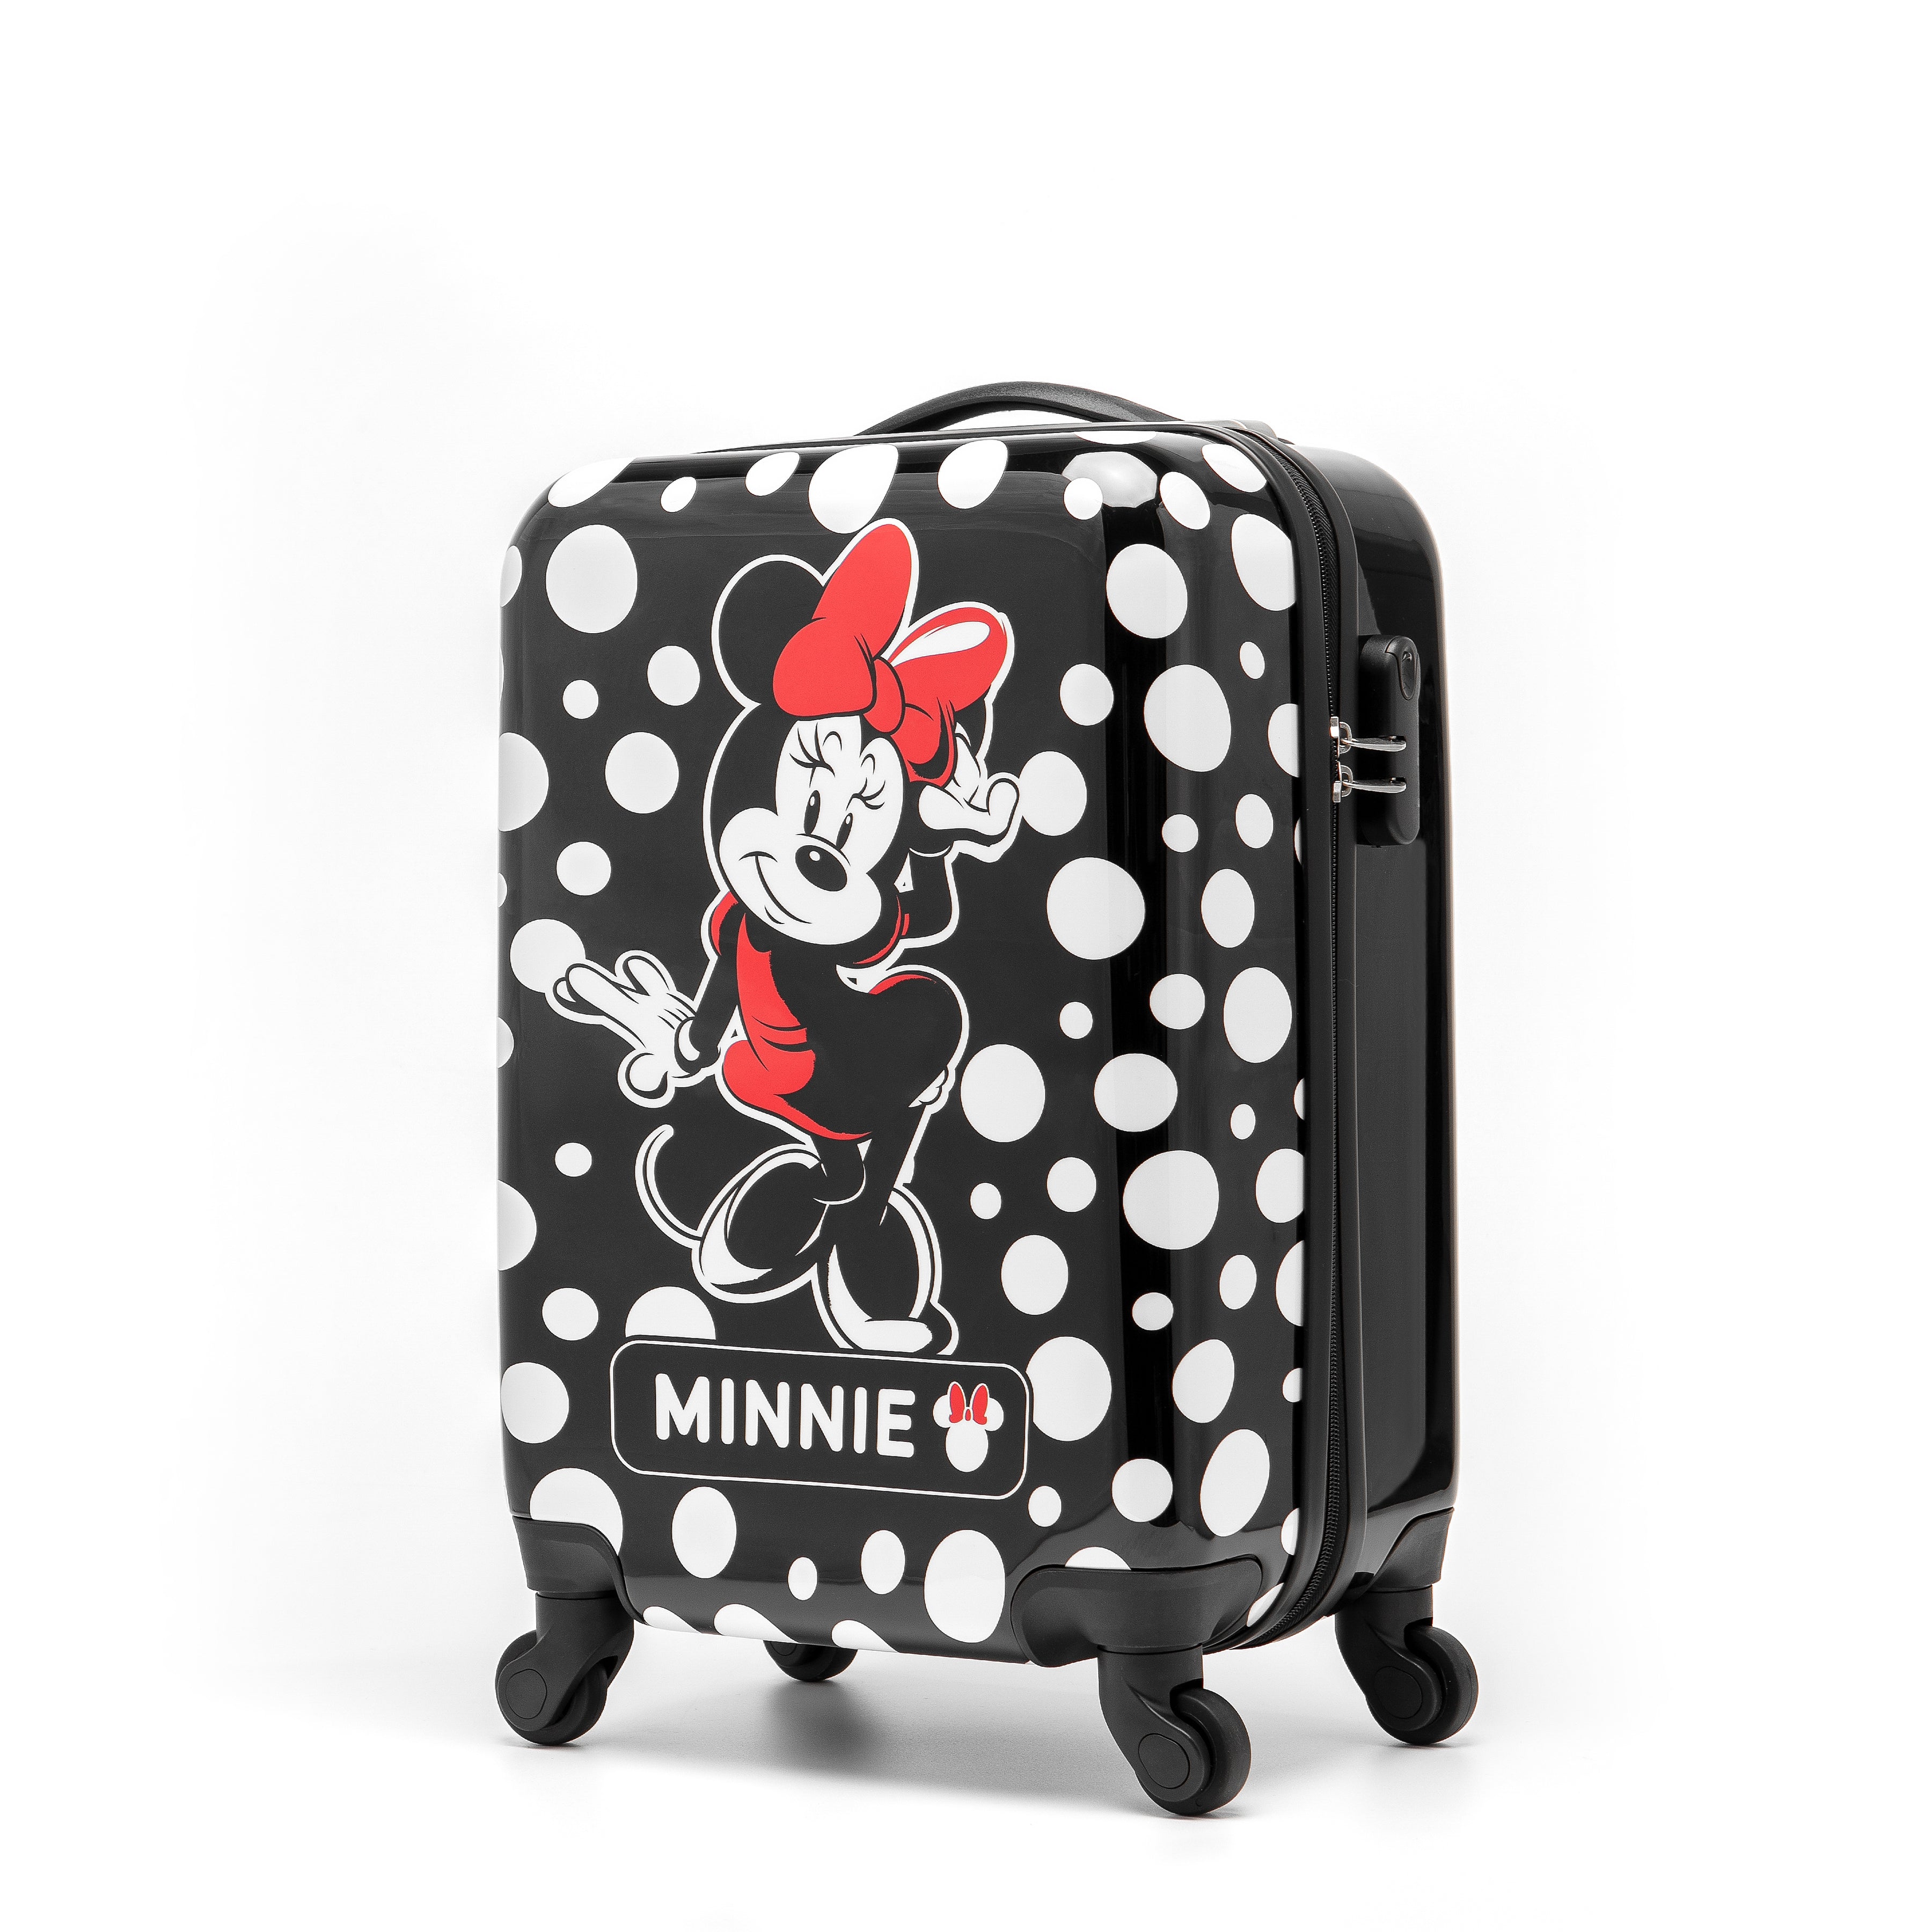 Disney - Minnie Mouse DIS207 19in Small 4 Wheel Hard Suitcase - Black - 0